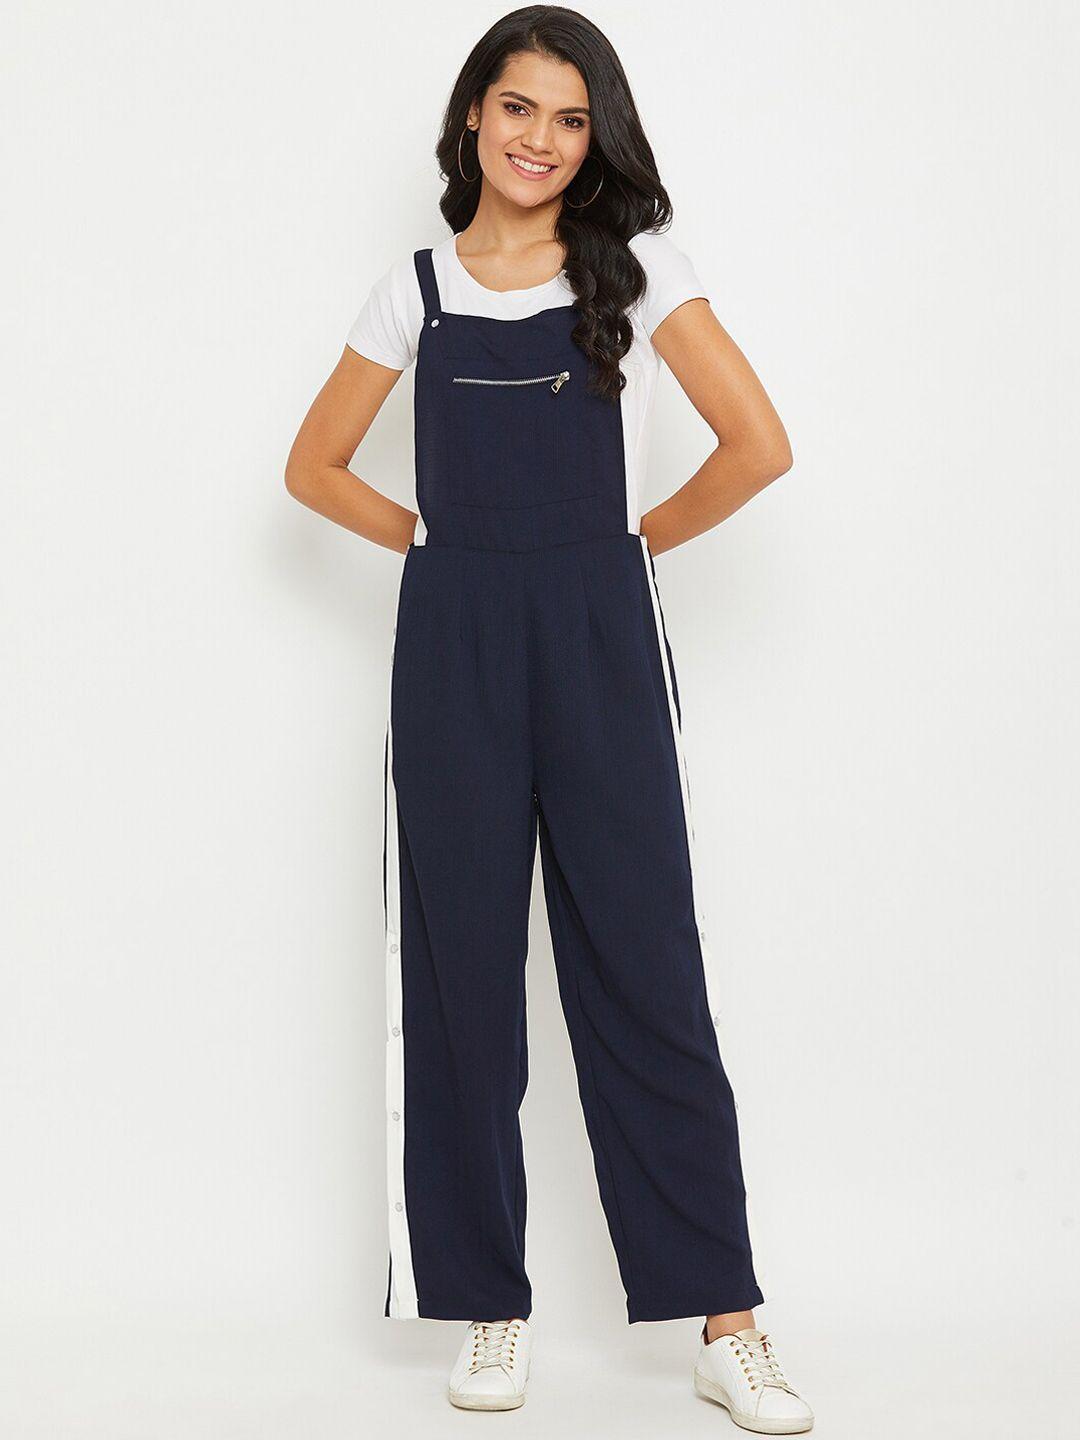 panit women navy blue solid dungarees